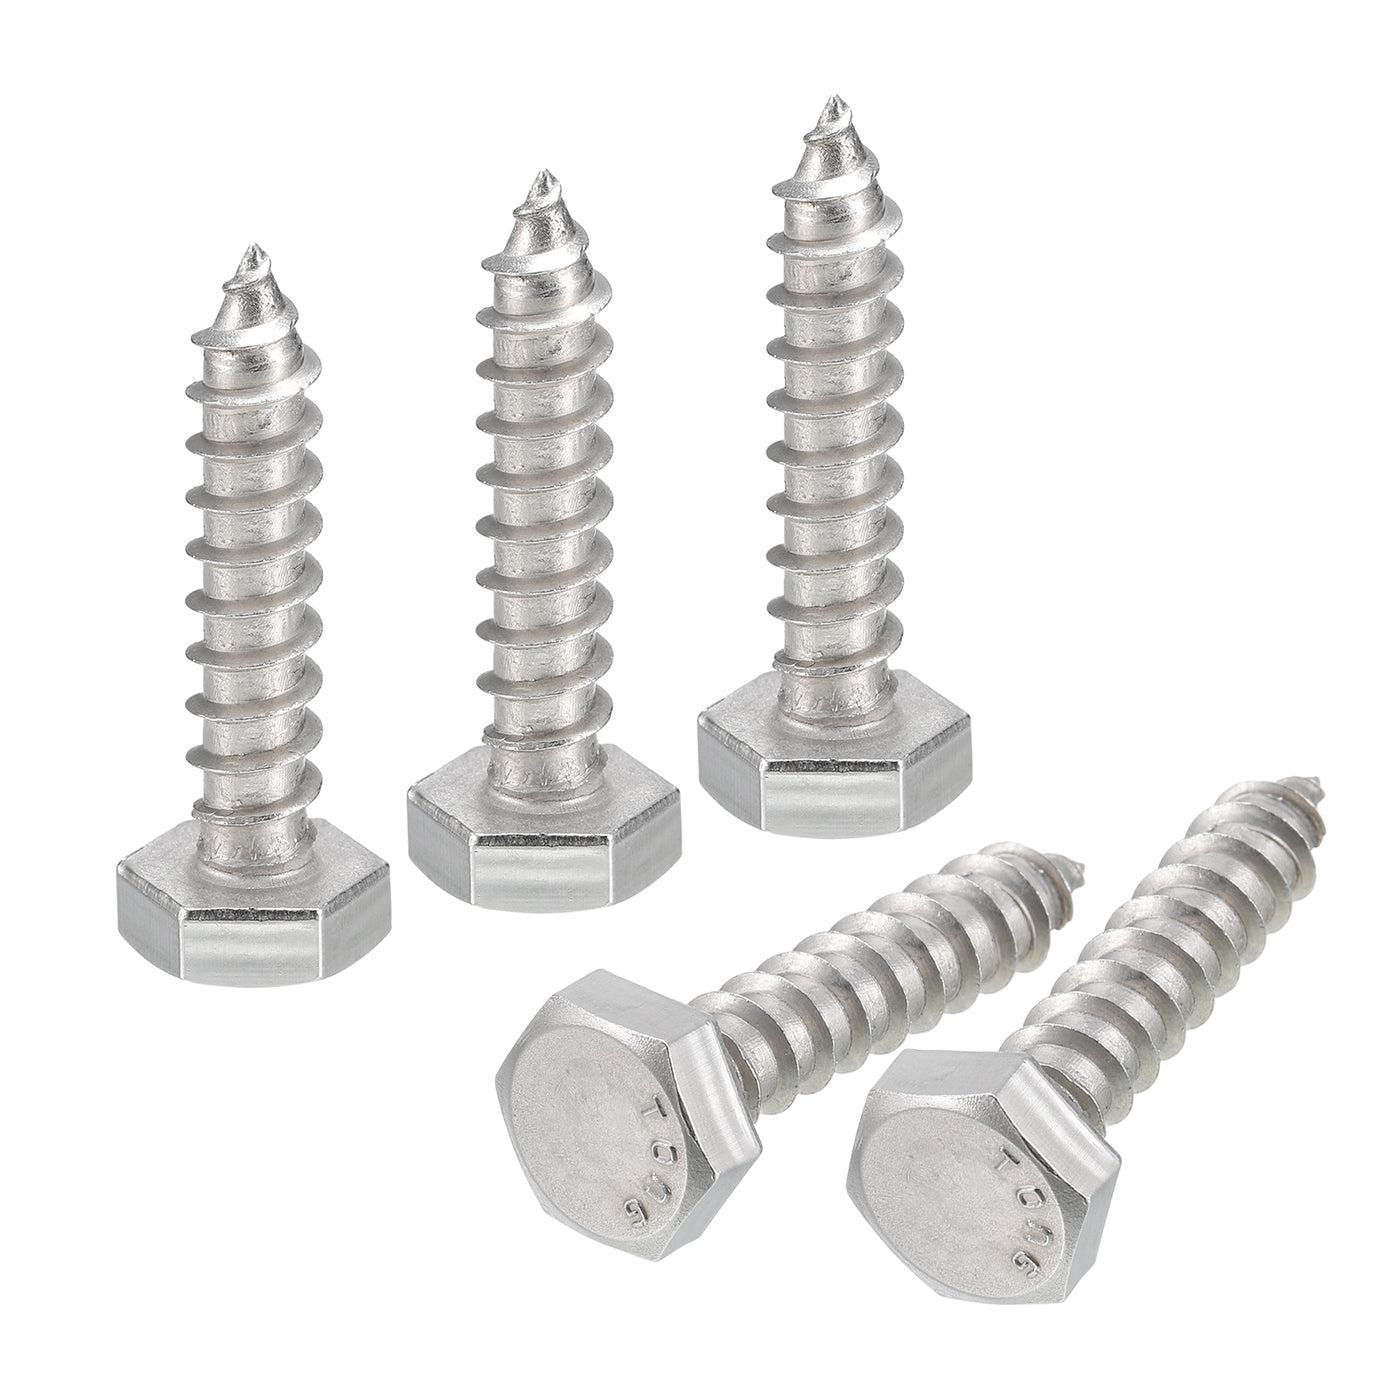 uxcell Uxcell Hex Head Lag Screws Bolts, 10pcs 1/4" x 1-1/4" 304 Stainless Steel Wood Screws